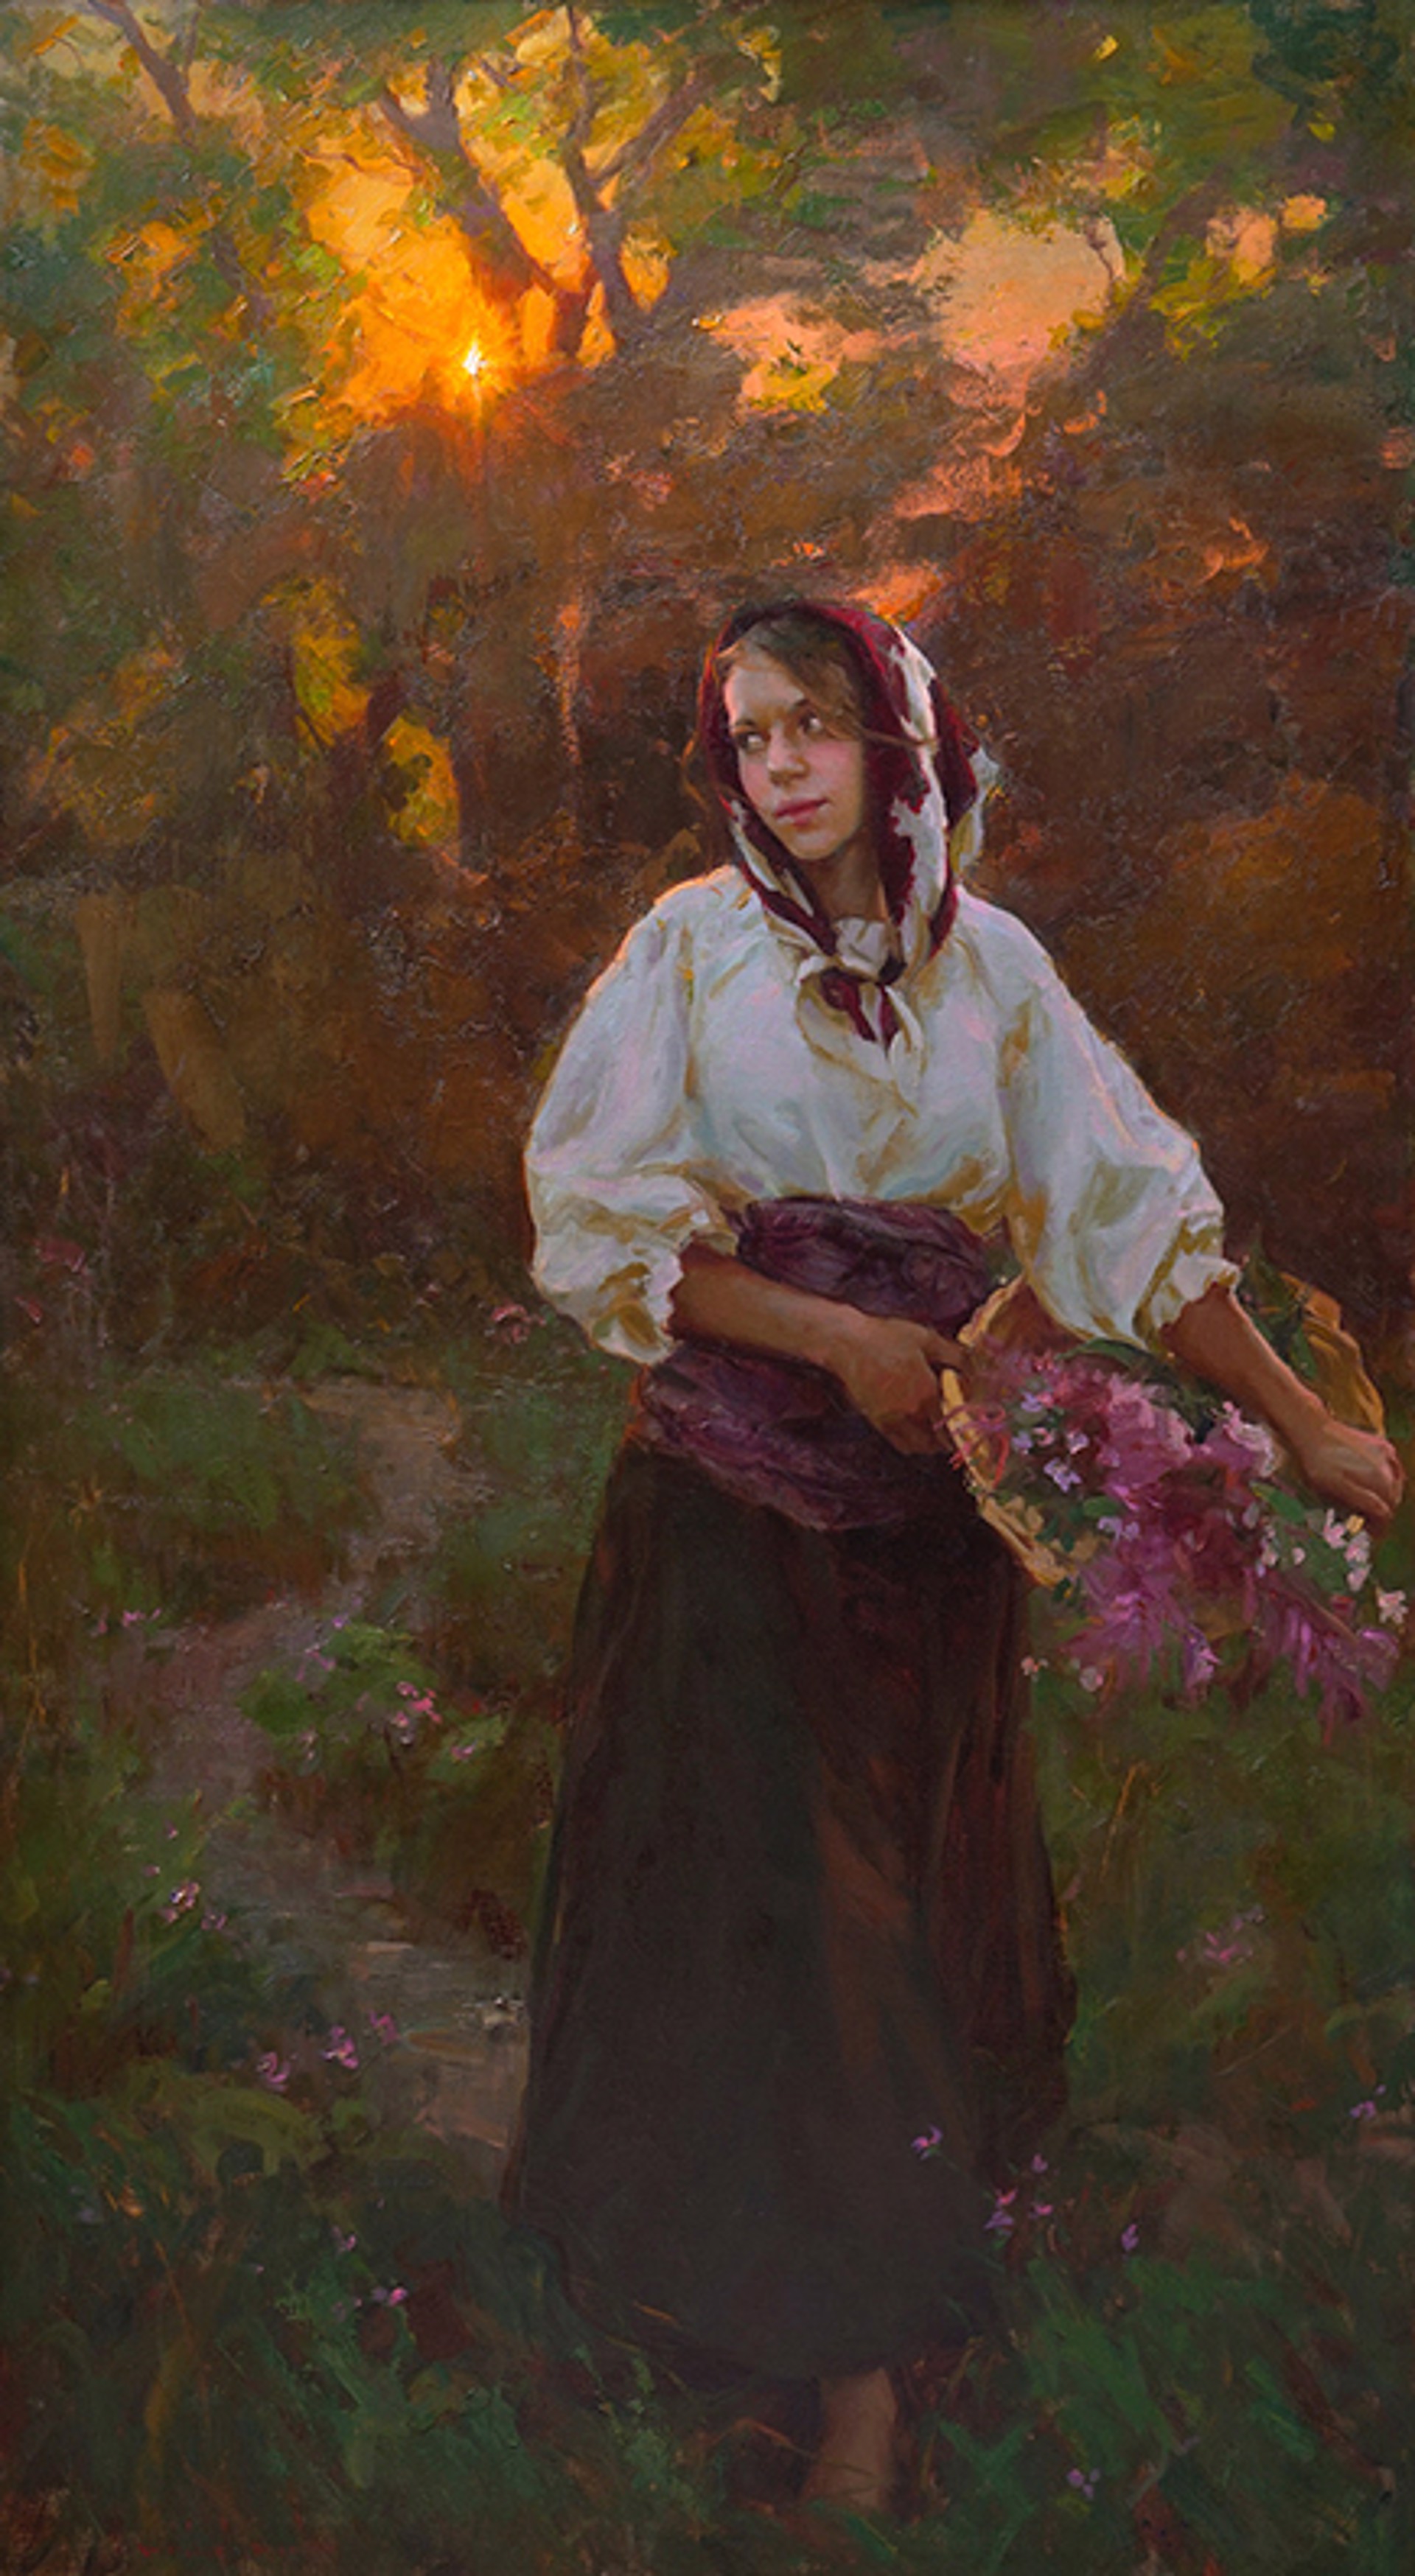 Evening Tranquility by Michael Malm